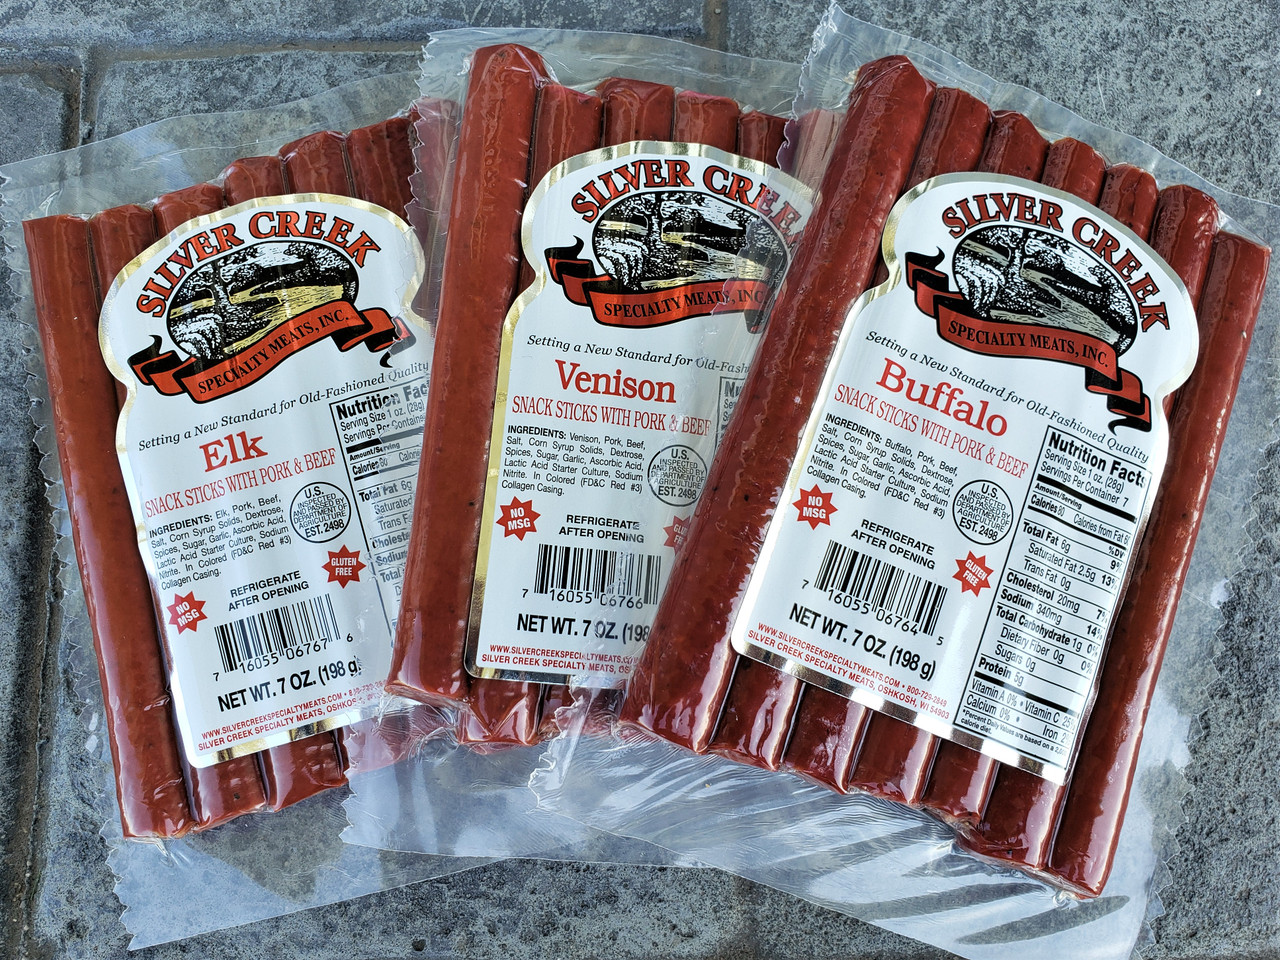 Buffalo and Elk sticks available in 7 oz packs too.